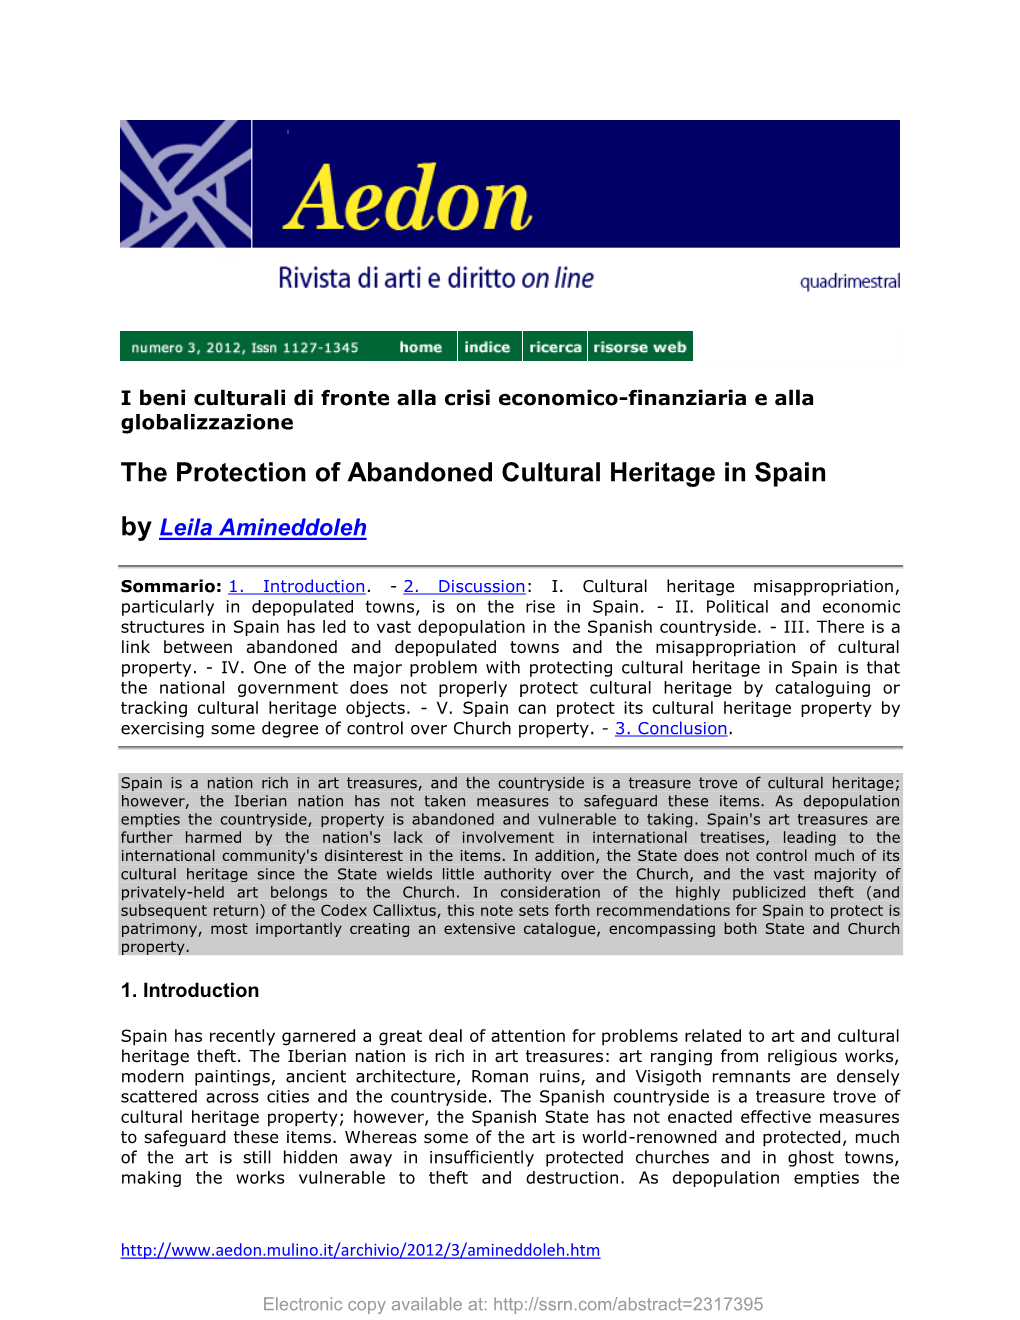 The Protection of Abandoned Cultural Heritage in Spain by Leila Amineddoleh